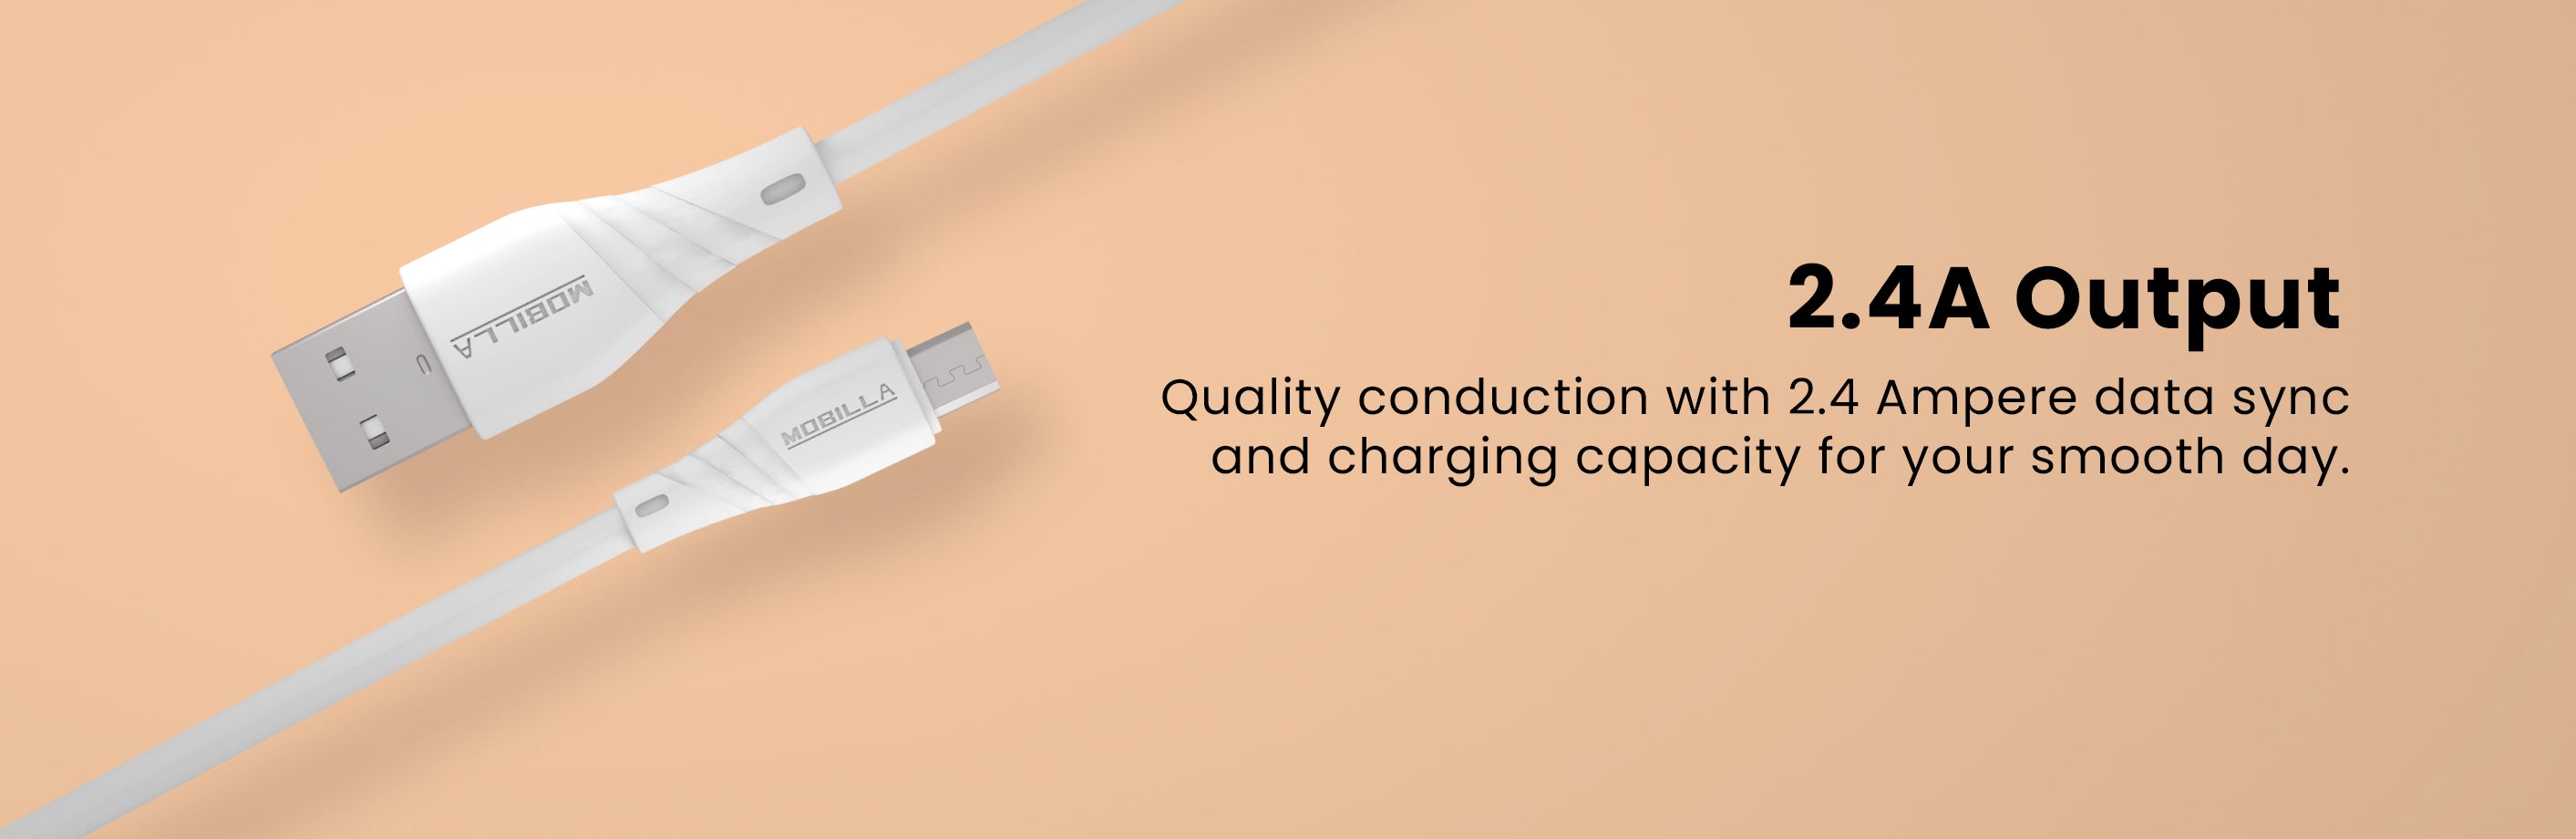 Micro USB Sync Cable